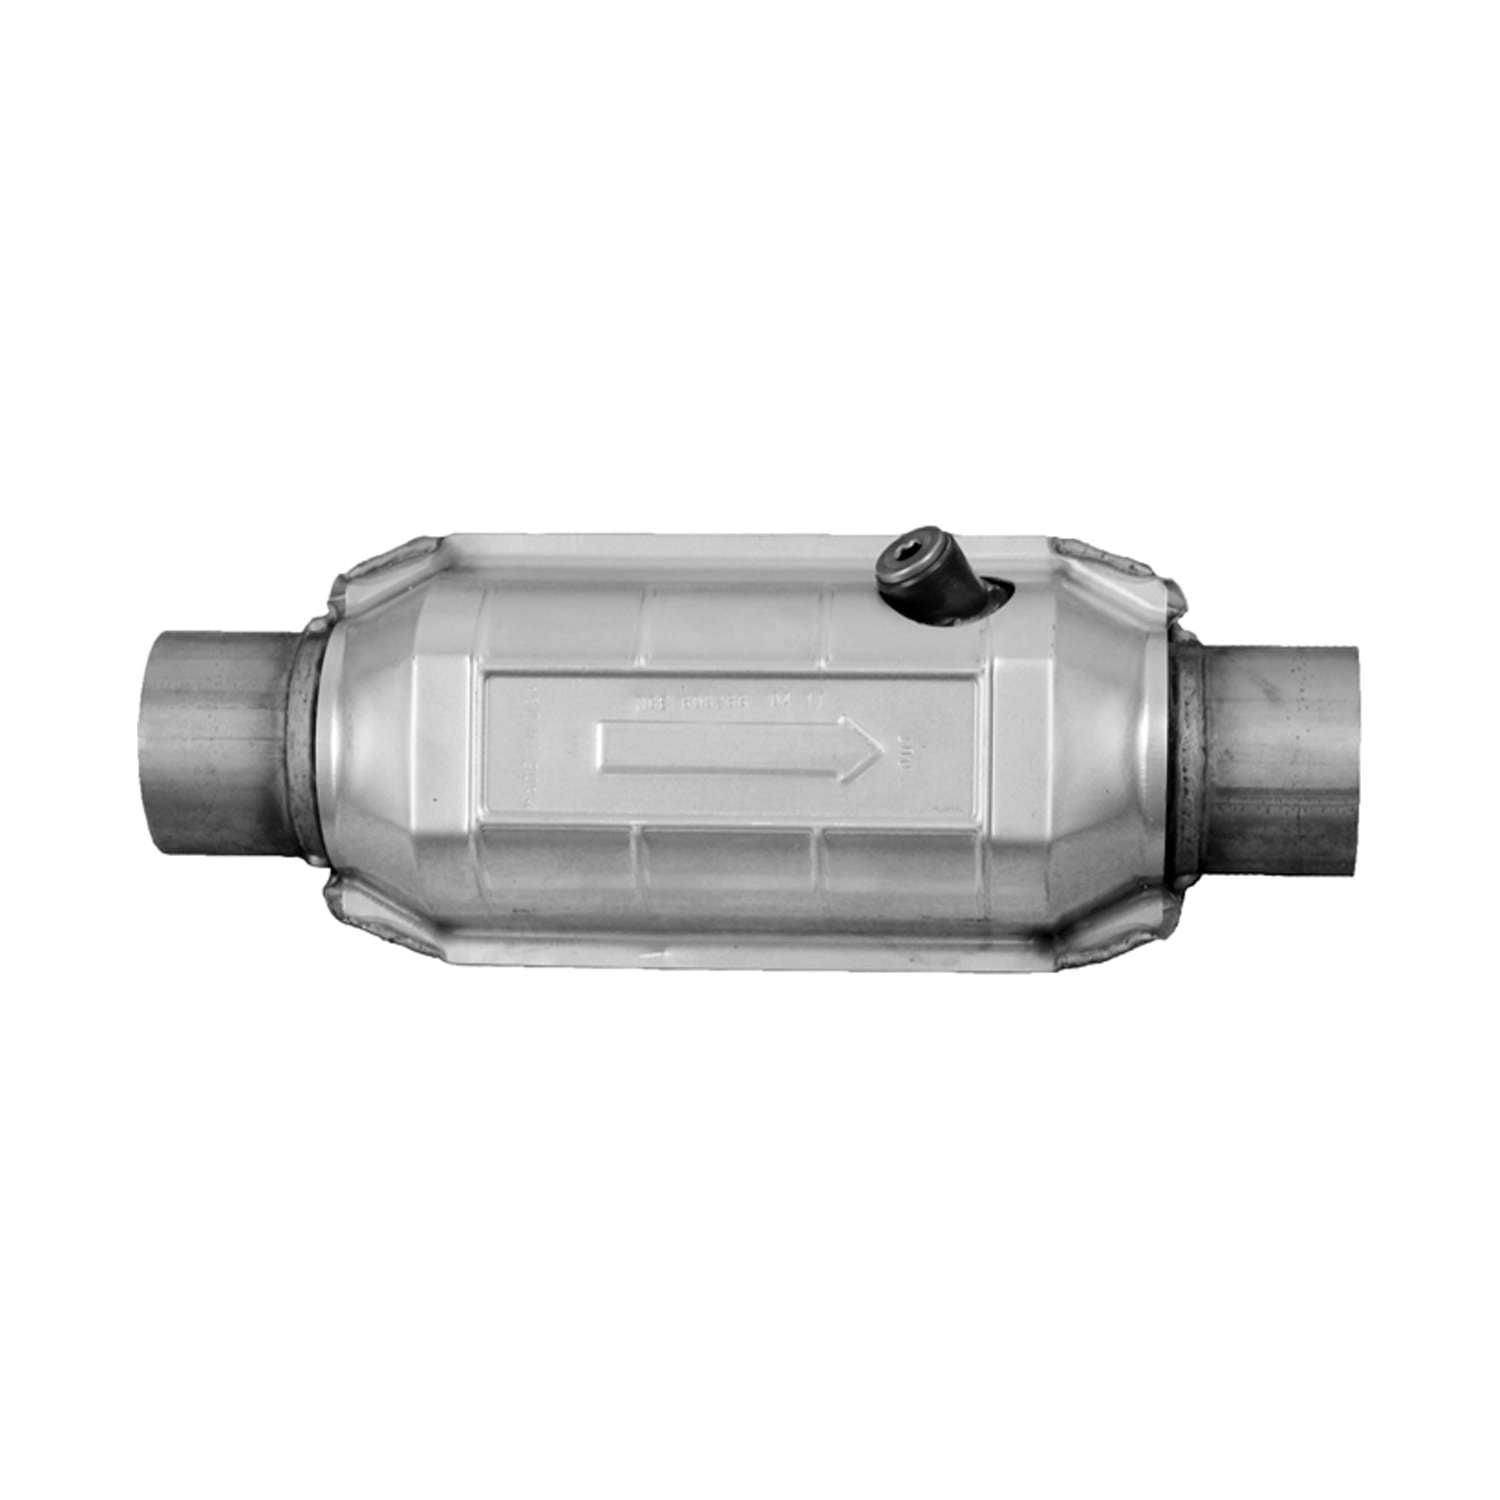 EPA Catalytic Converter Catco 4469 Federal Direct Fit 